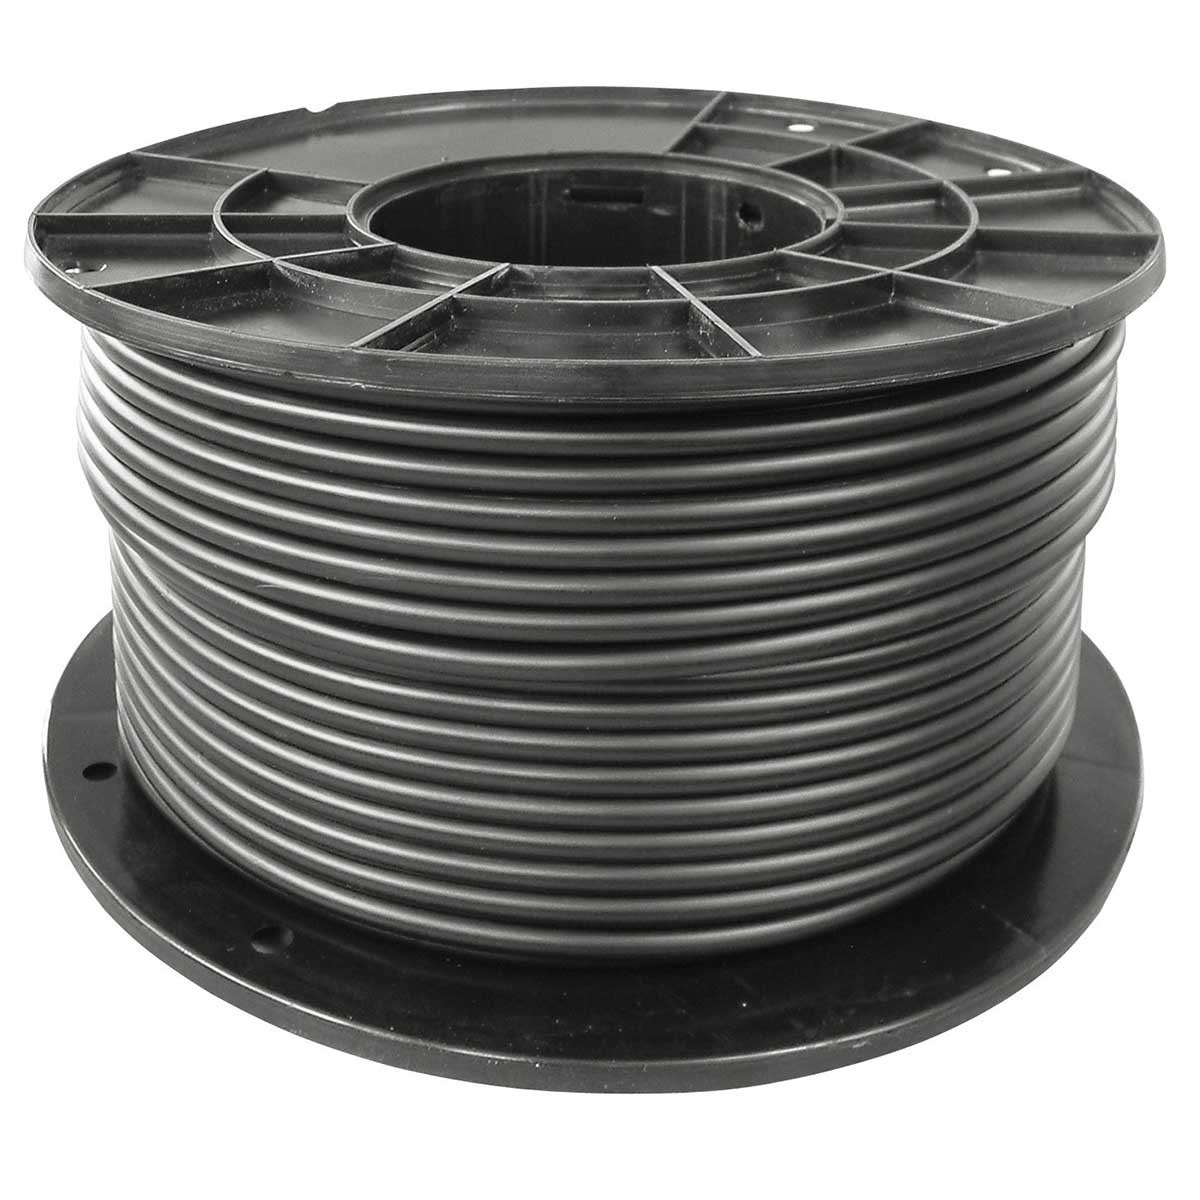 High-voltage underground cable 50 m on plastic reel